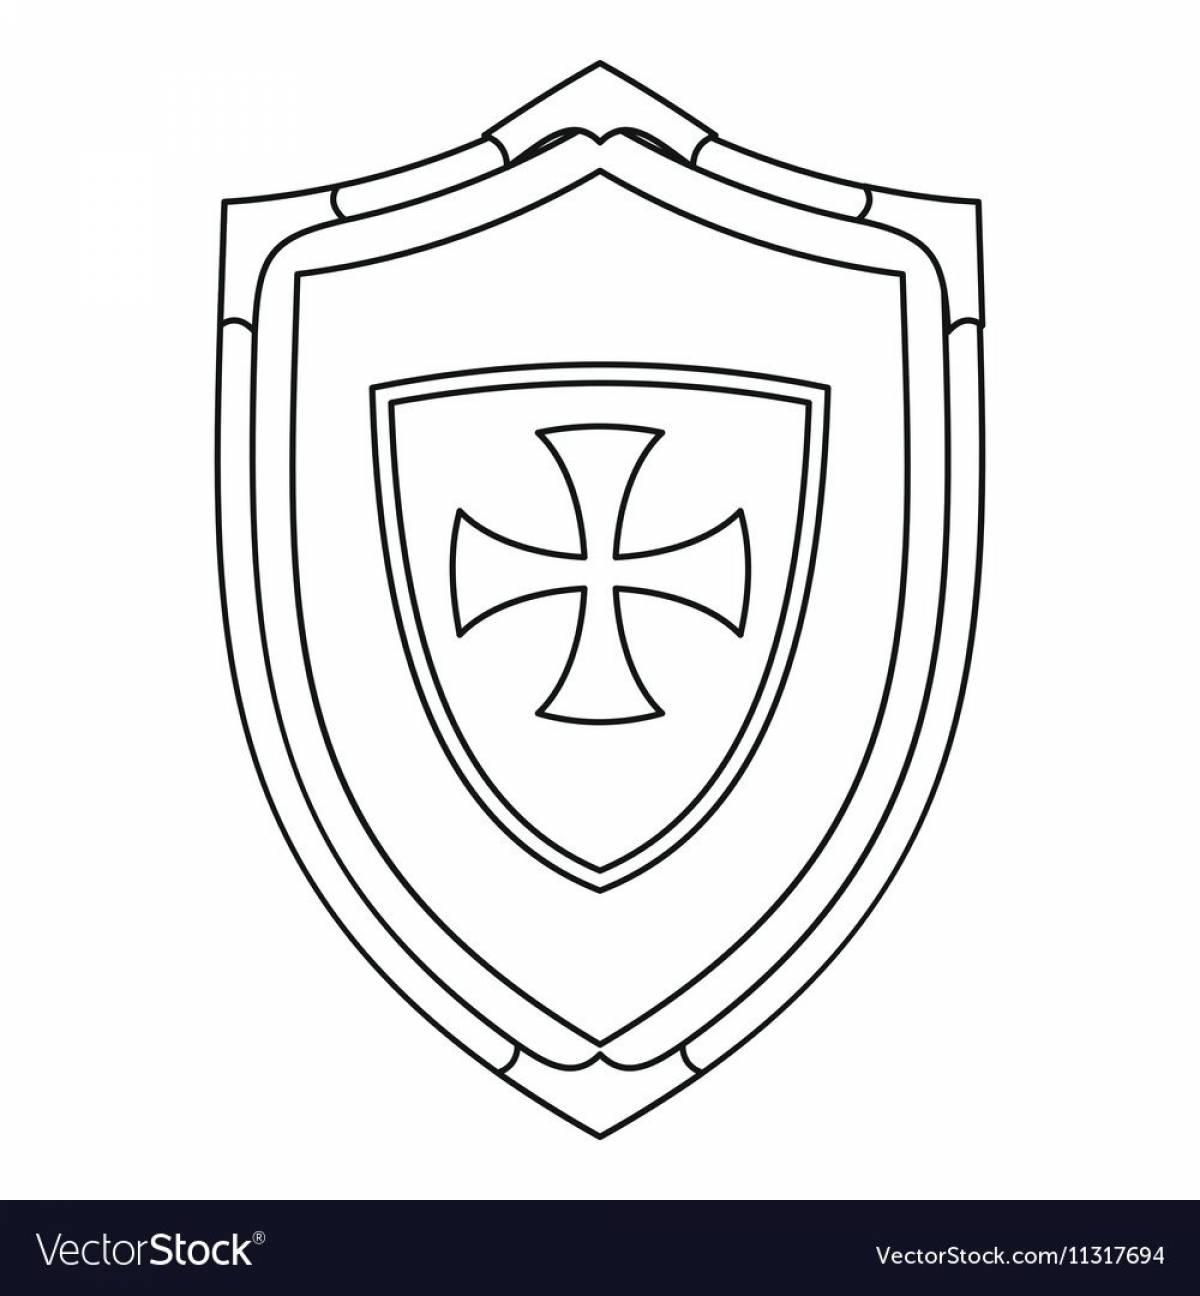 Glowing Hero Shield Coloring Page for Toddlers